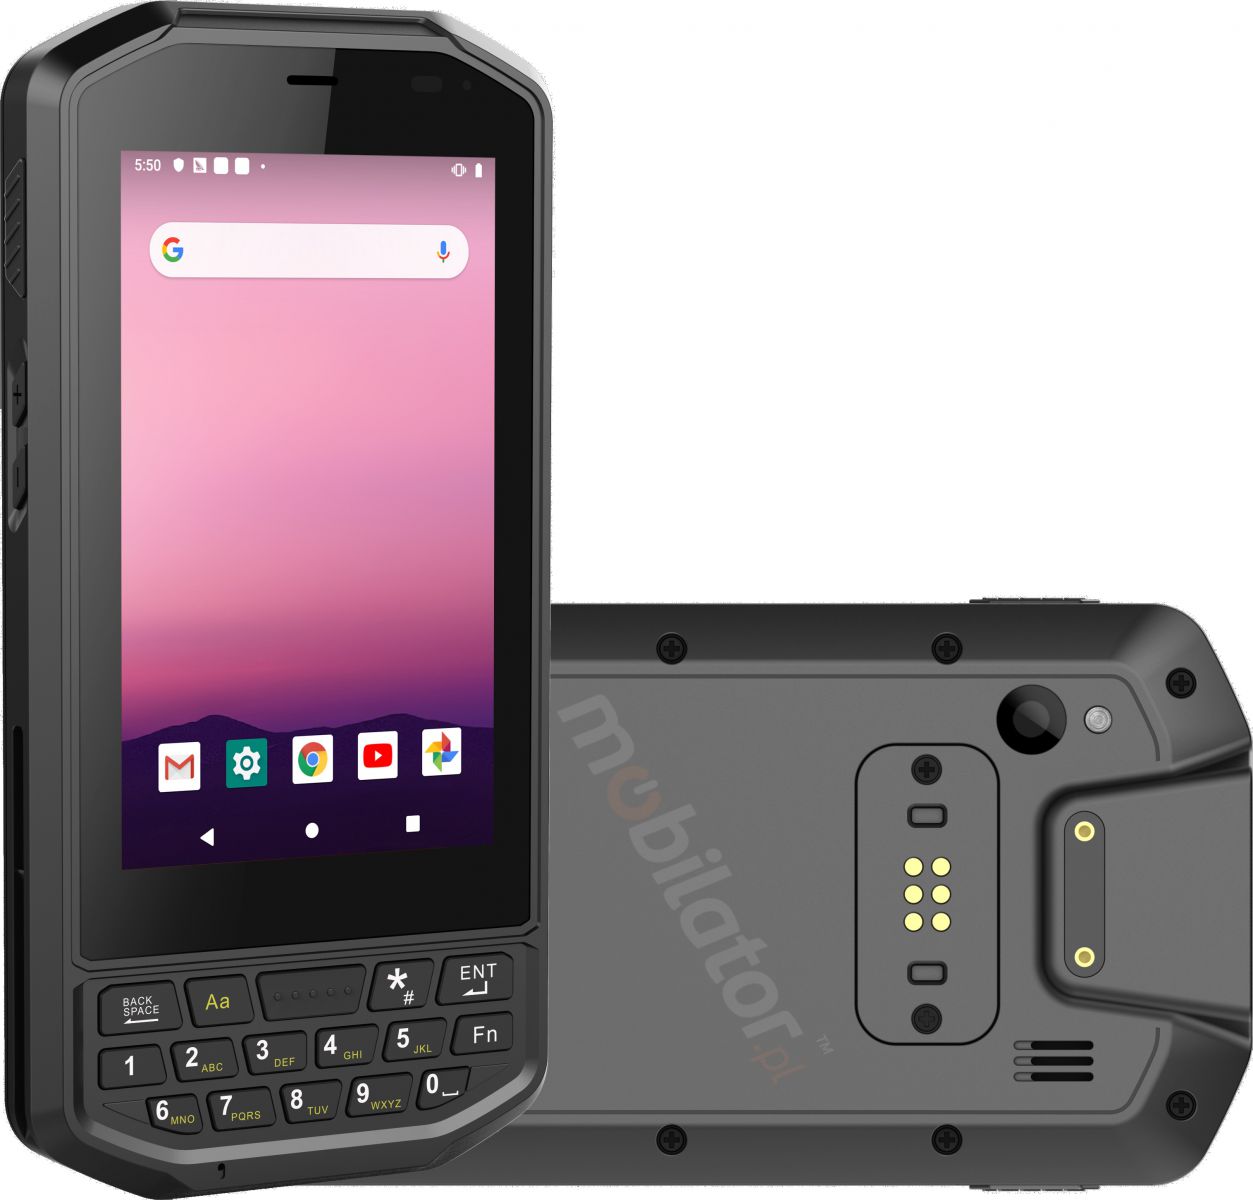 Industrial (IP65 + MIL-STD-810G) data collector with 4GB RAM memory, 64GB ROM disk and Zebra 2100 2D code scanner and NFC- Mobipad Qxtron 4100 v.1 